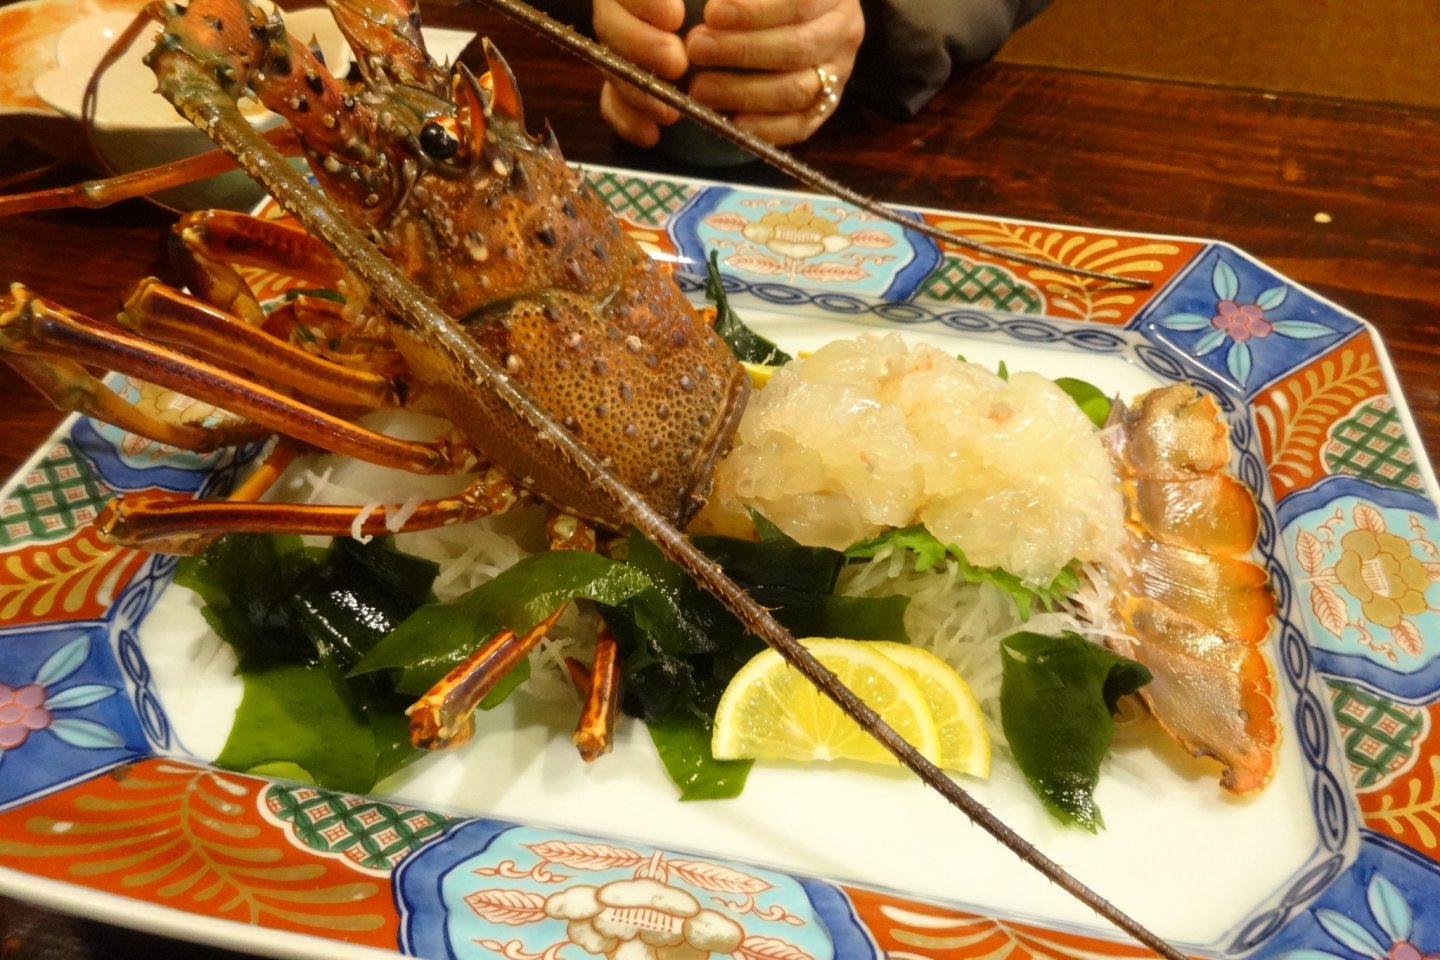 Spiny lobster sashimi is the first dish in one of Uoichi's special kaiseki courses